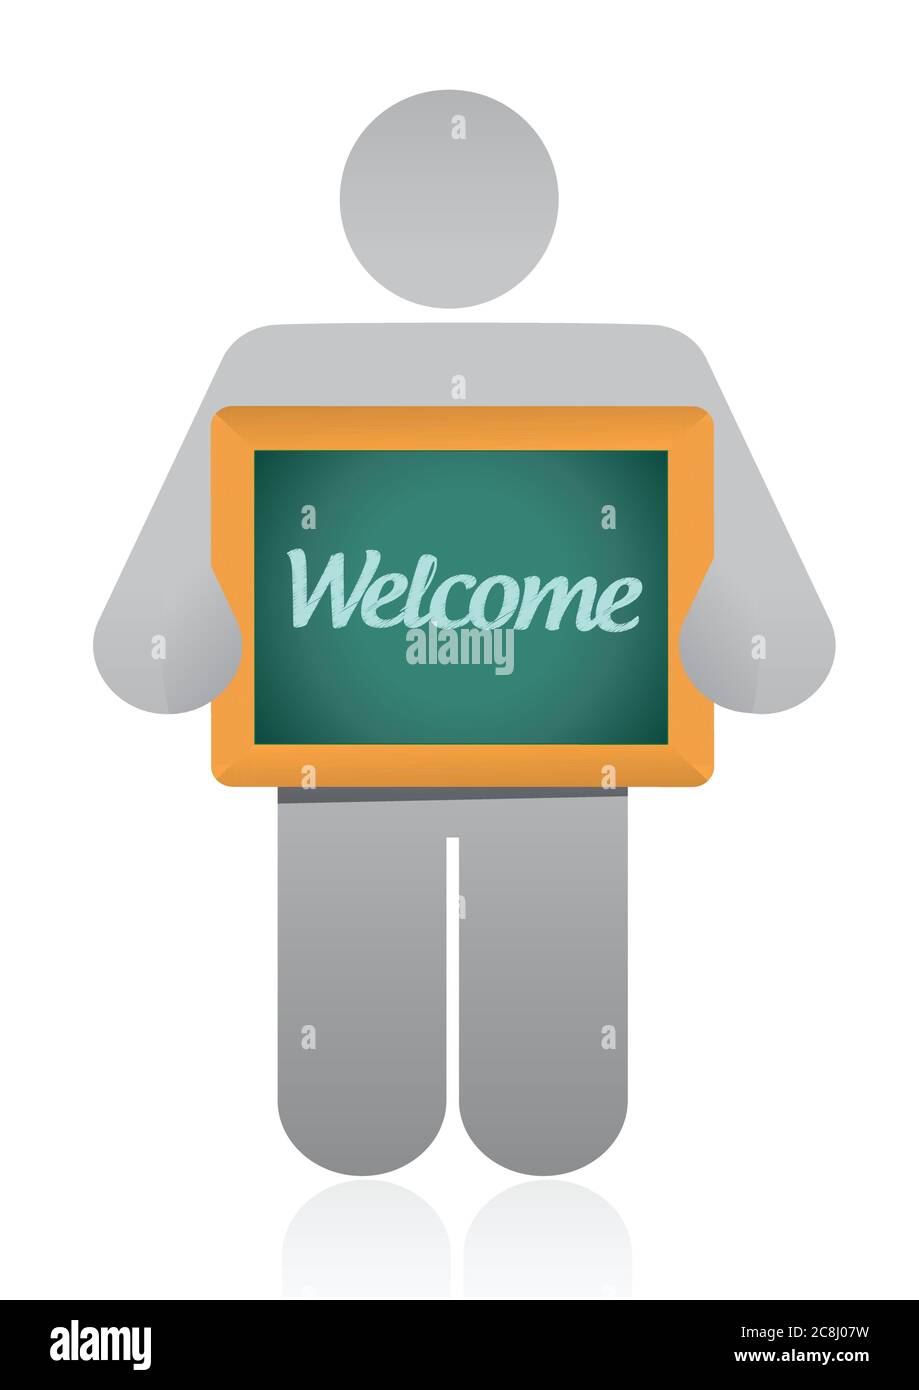 Welcome message illustration design over a white background Stock Vector